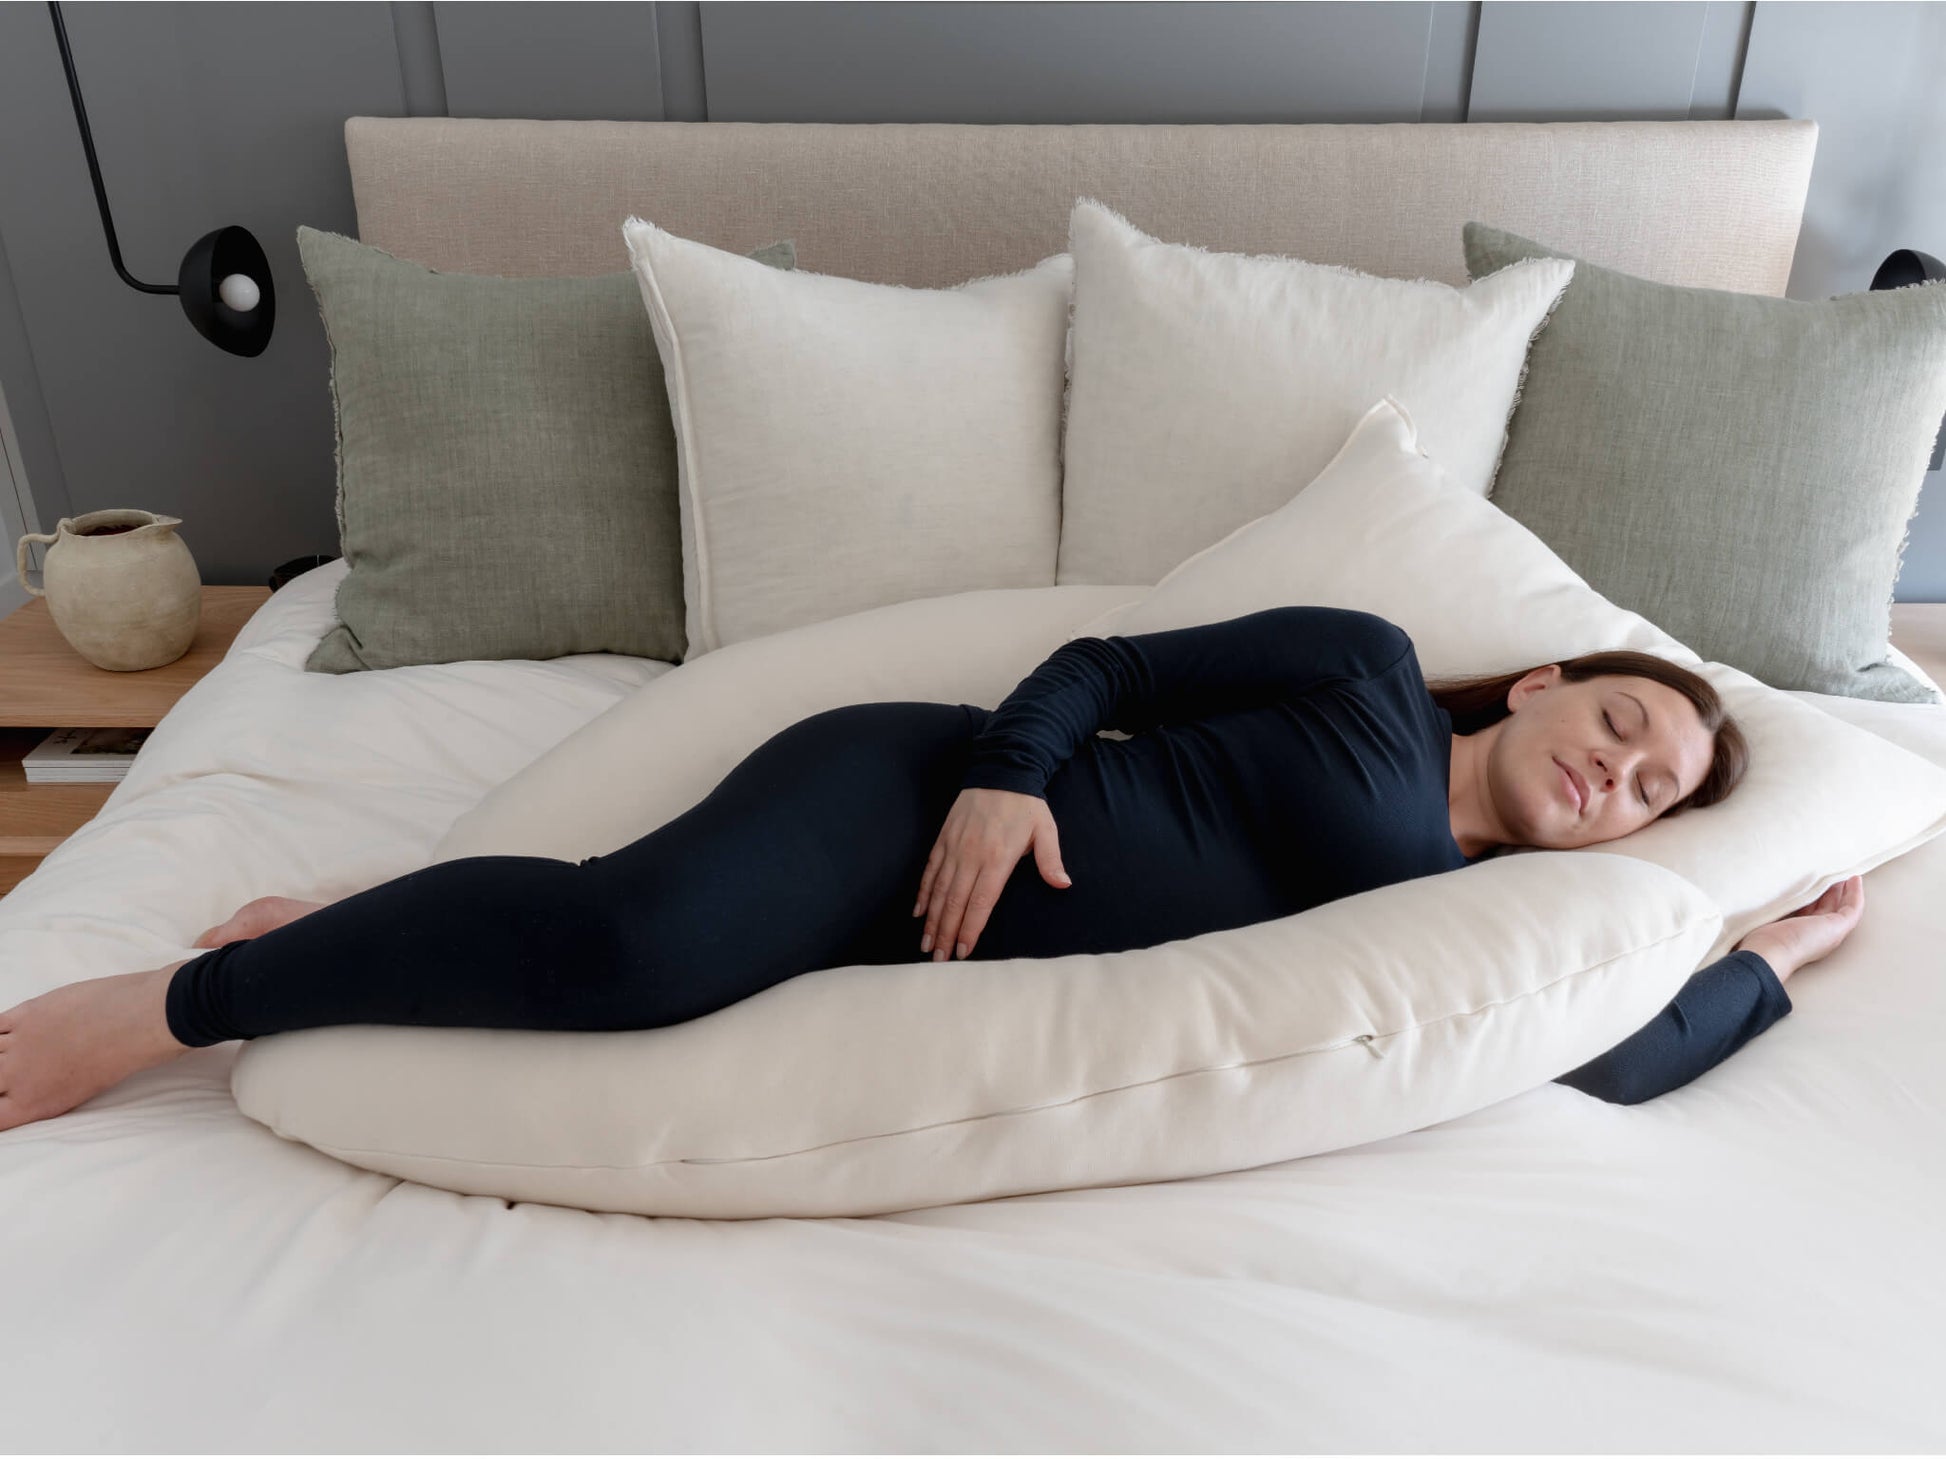 Chilling Home Pregnancy Pillows, U Shaped Full Body Maternity Pillow 58  inch, Pregnant Women Must Haves Pregnancy Pillows for Sleeping with  Removable